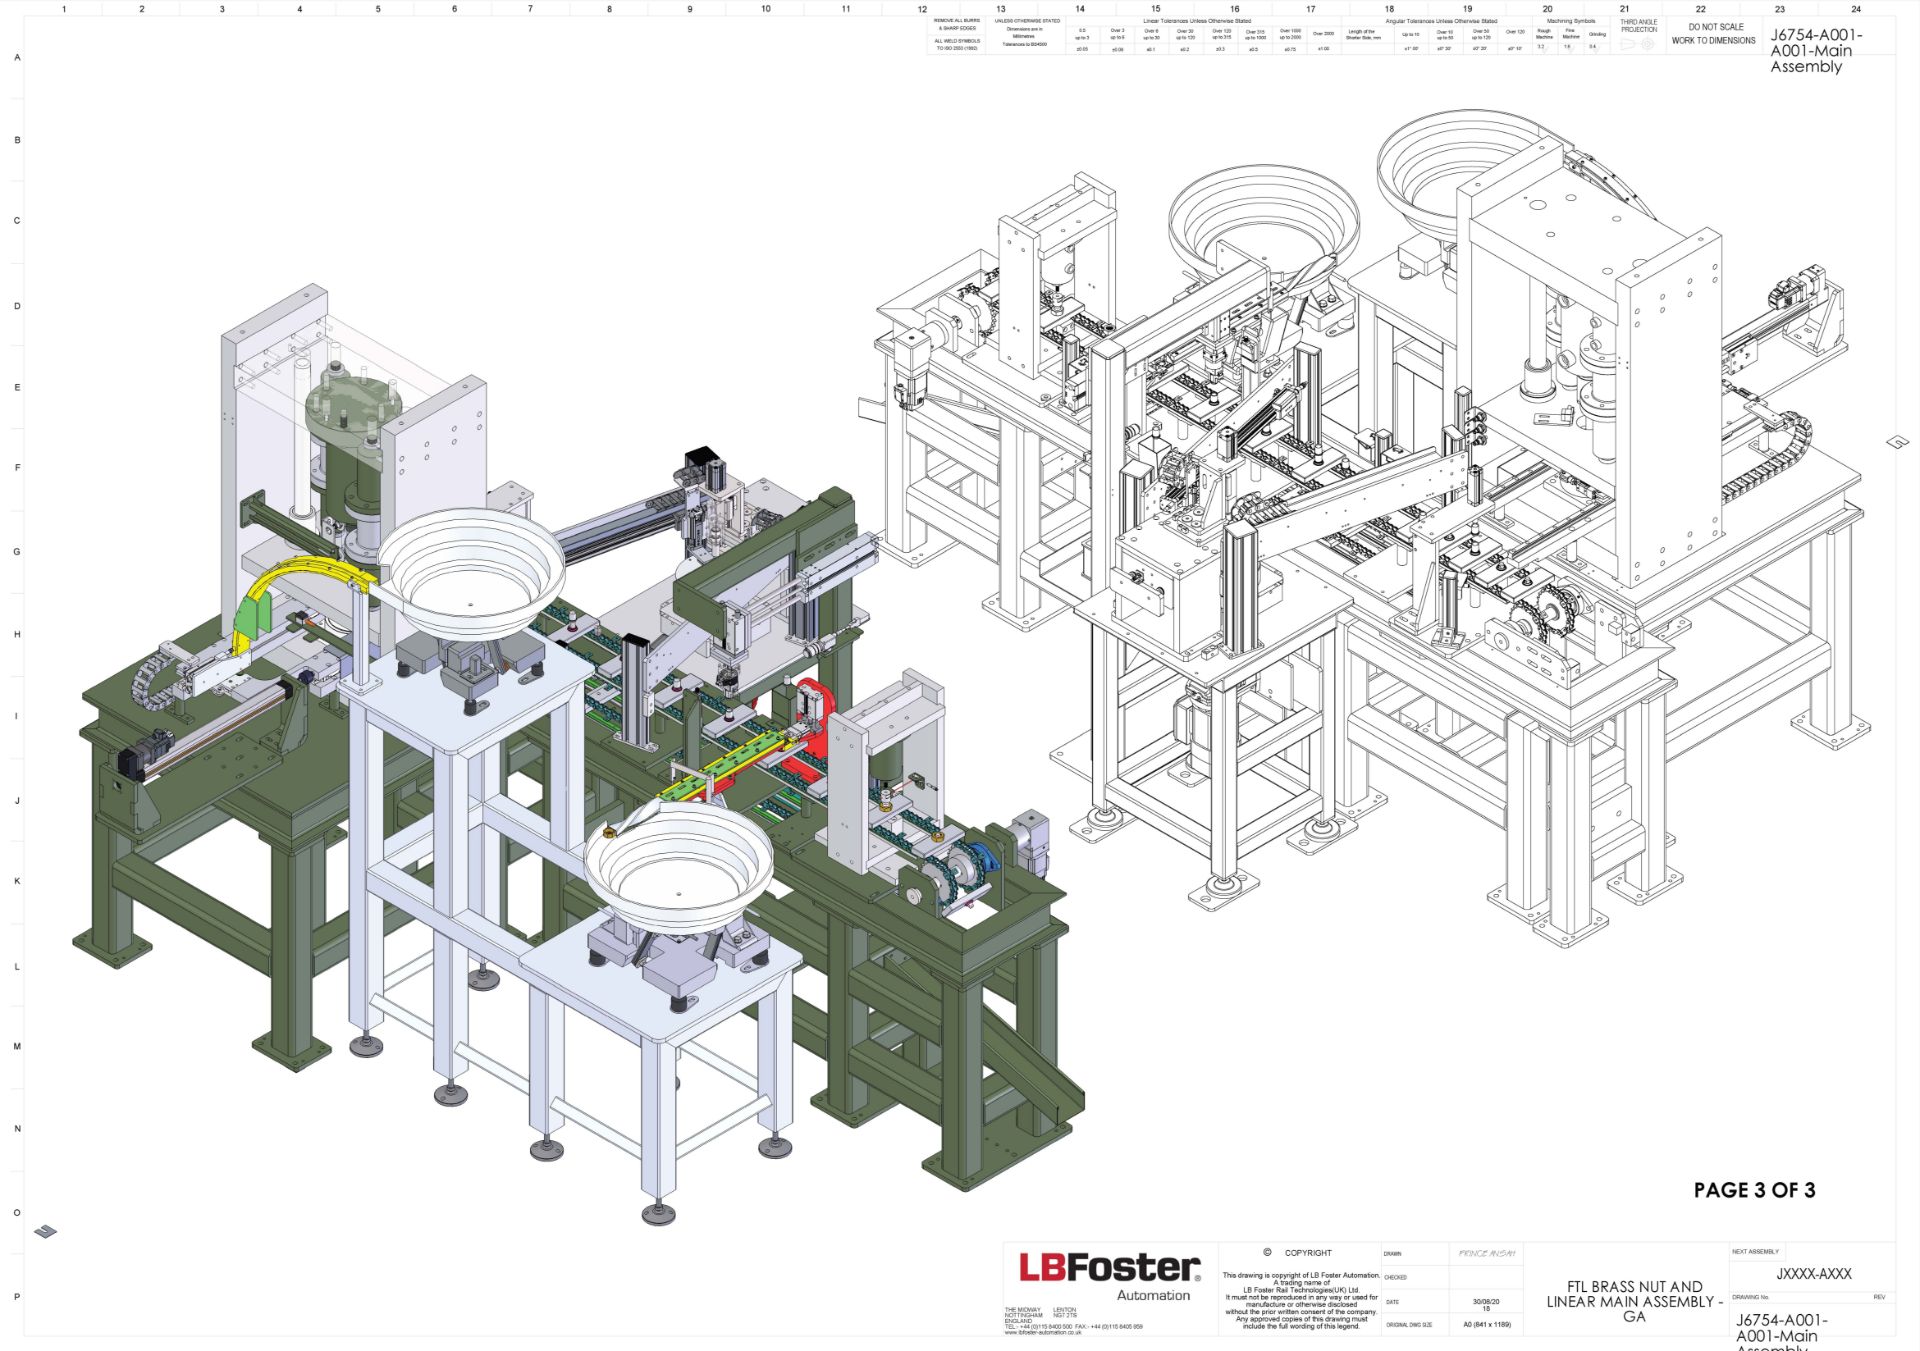 LB Foster Automation Brass Nut and Liner Forming Machine (2019), Serial Number 001 - Image 13 of 17